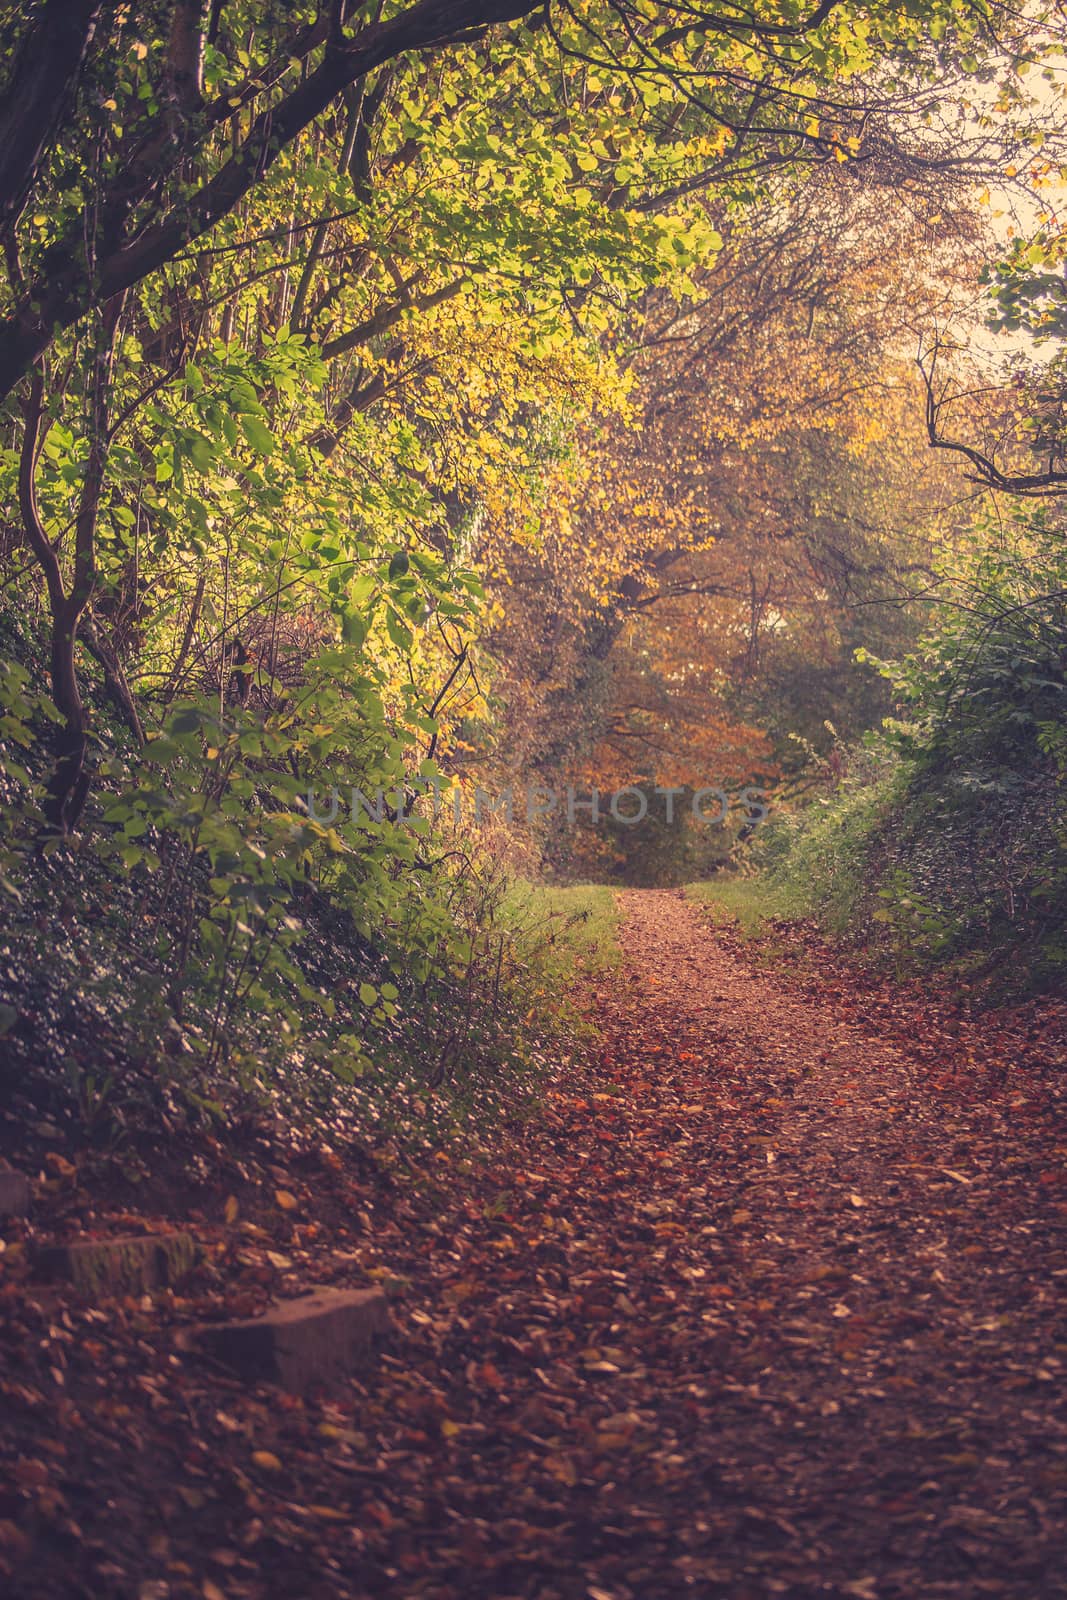 Autumn leaves on a road in the forest by Sportactive